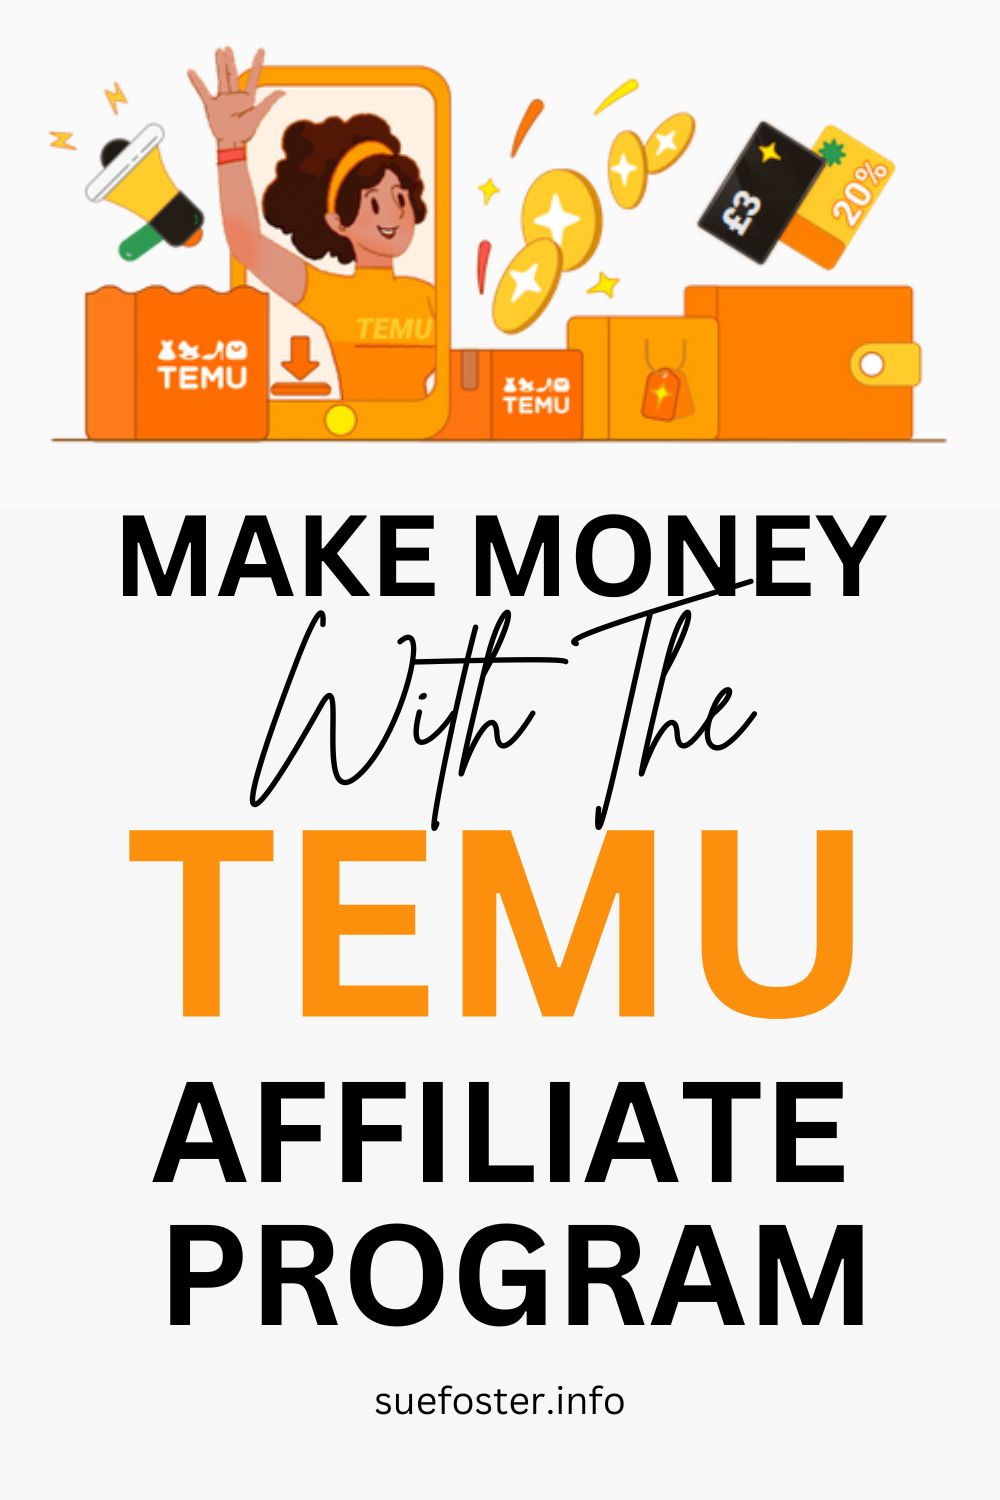 Discover Temu, the go-to online marketplace with unbeatable prices on clothing, electronics, and more. Join the Temu Affiliate Program and earn up to a maximum £100,000 monthly earnings.